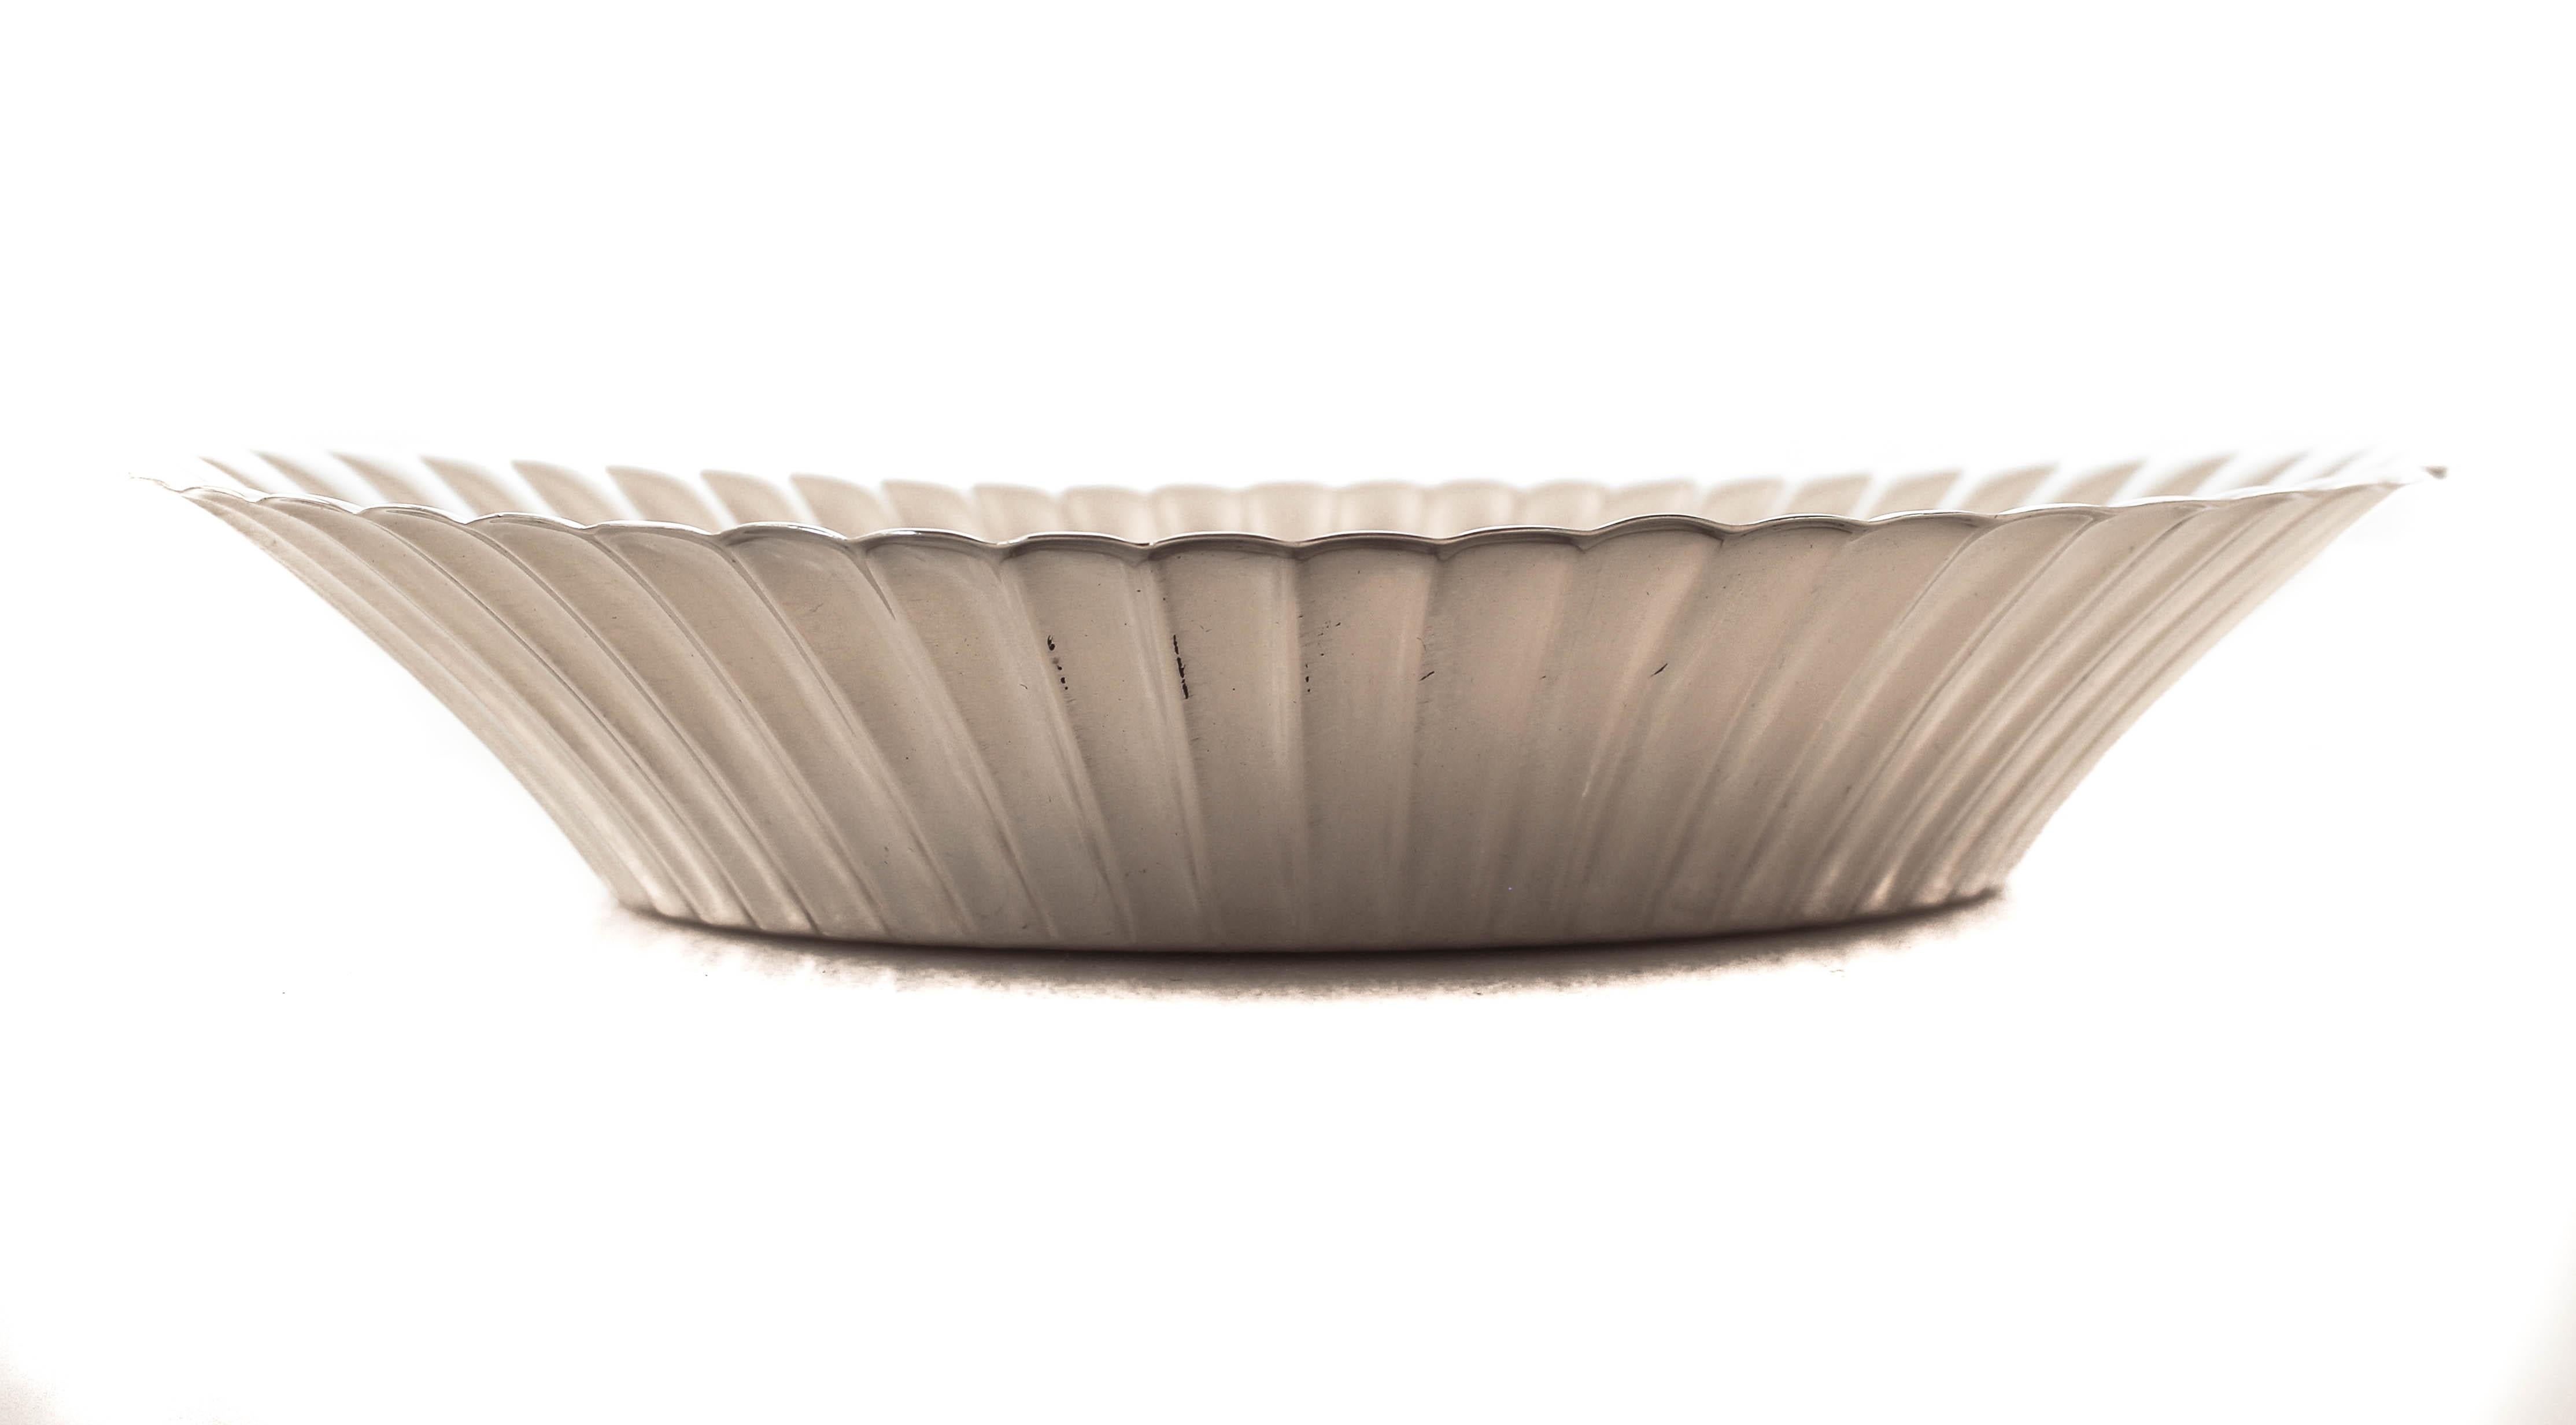 We are delighted to offer this sterling silver breadbasket by Reed and Barton, hallmarked 1937. It has a fluted edge giving it an Art Deco feel. The style goes with any decor or style; from ornate to modern.